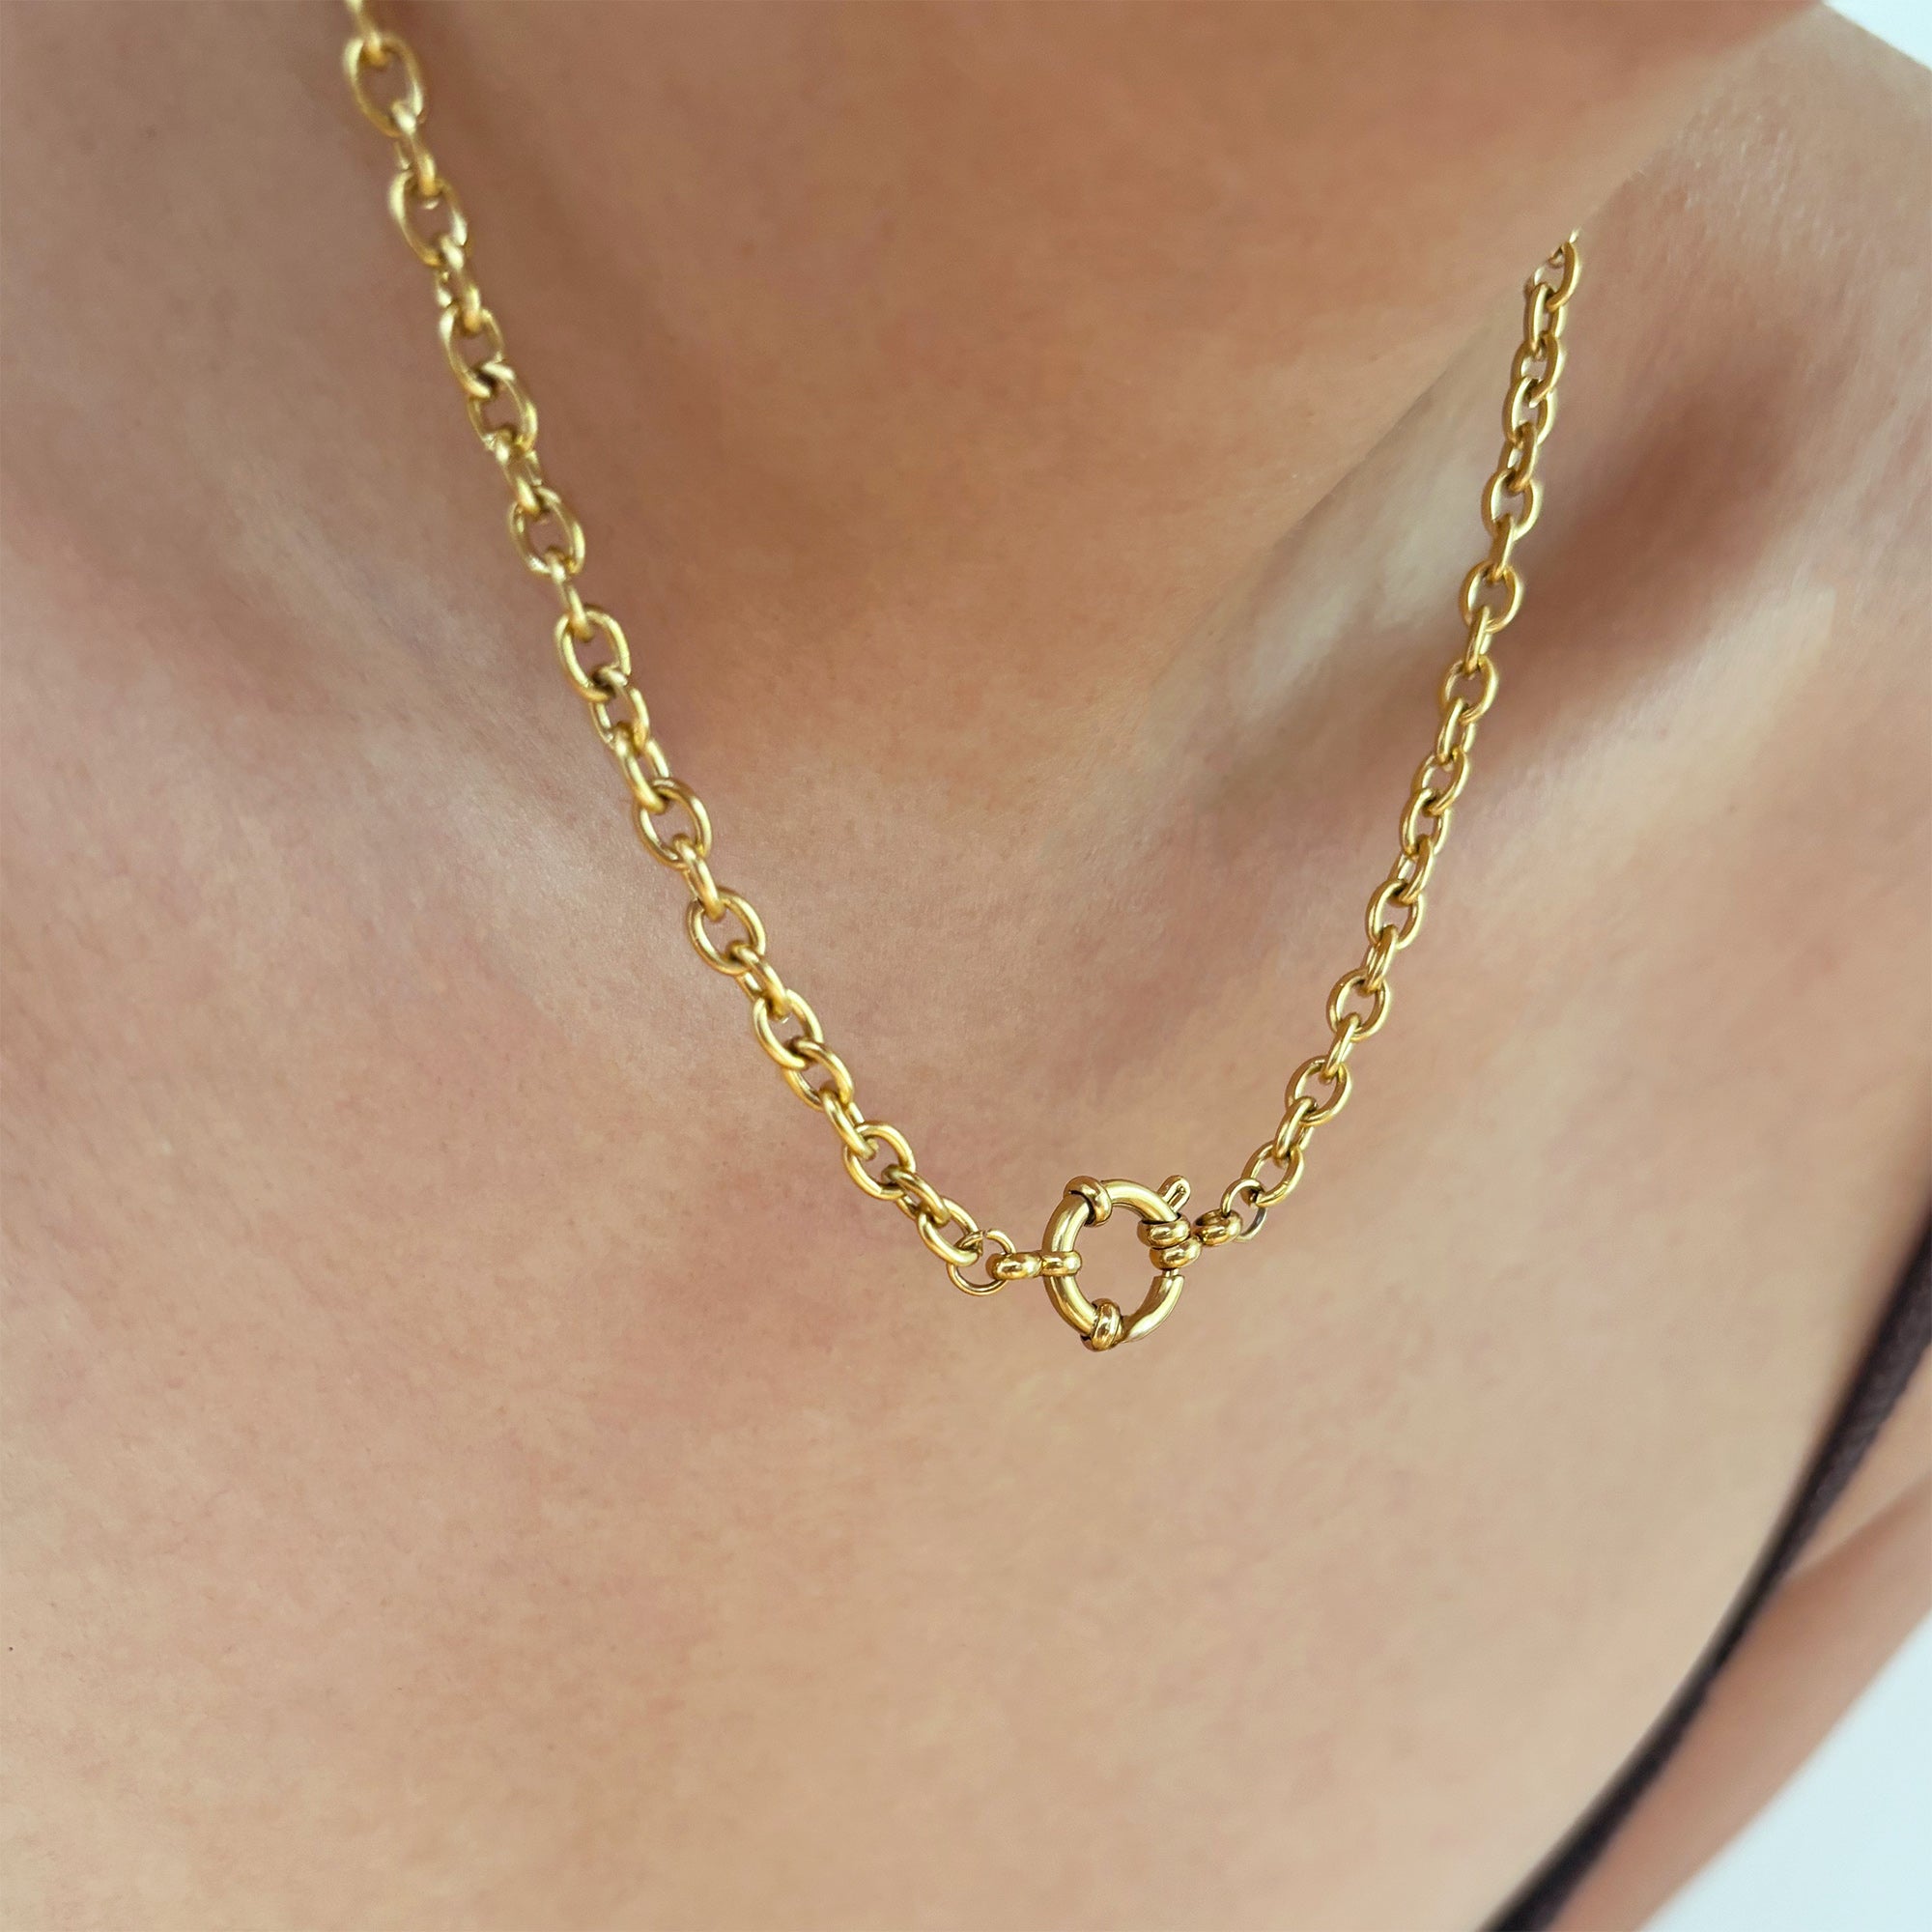 gold cable chain charm necklace waterproof jewelry worn on model